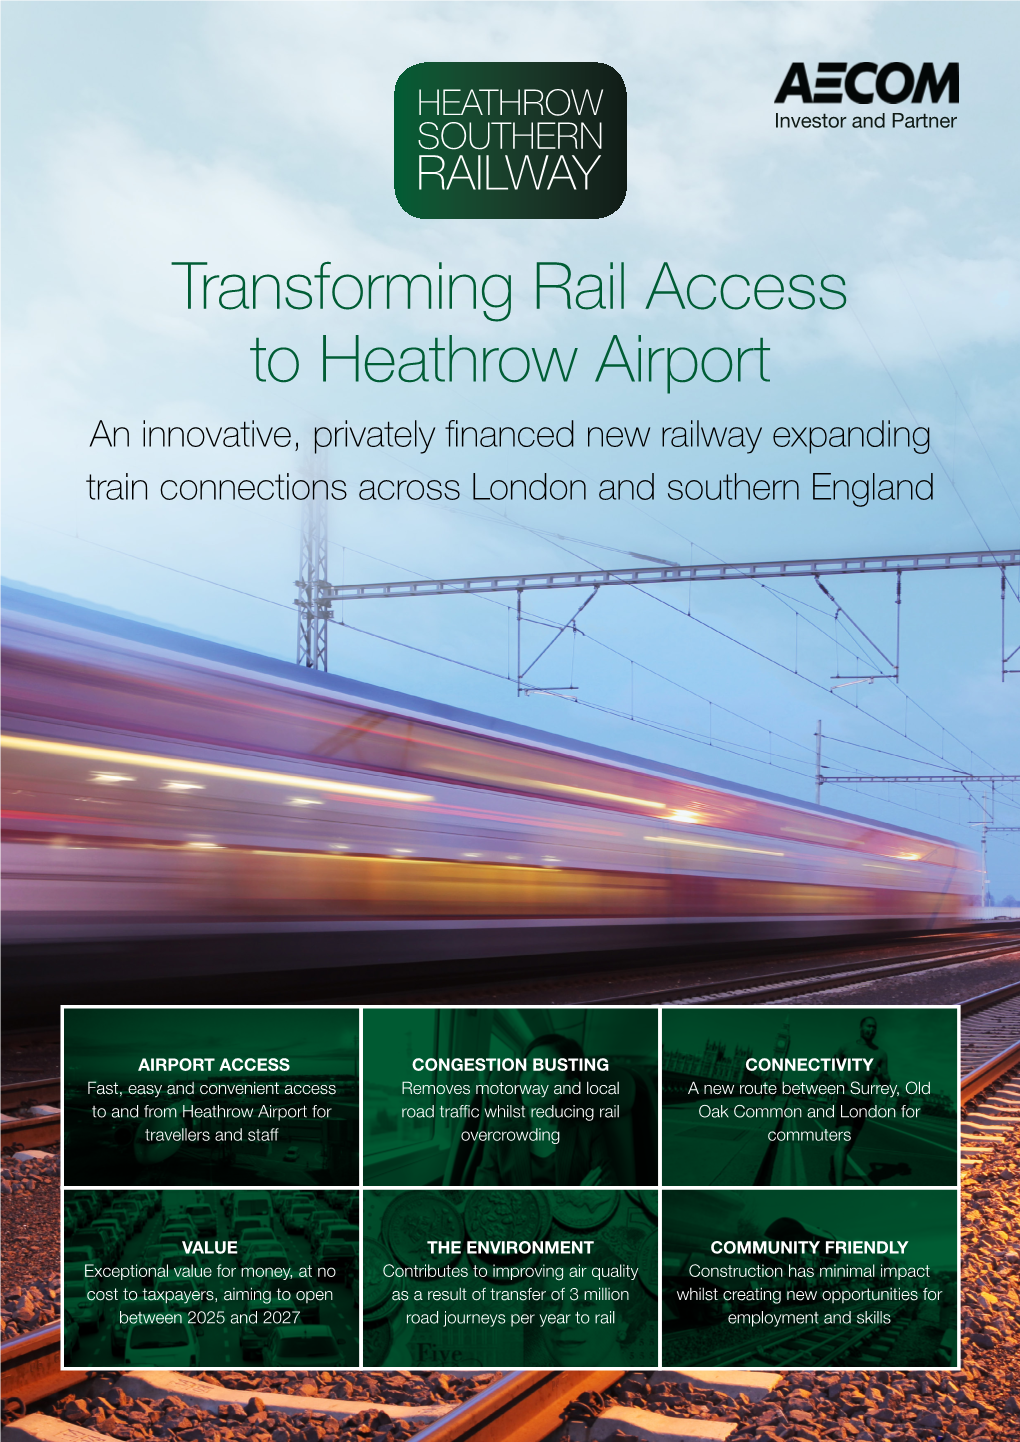 Transforming Rail Access to Heathrow Airport an Innovative, Privately Financed New Railway Expanding Train Connections Across London and Southern England